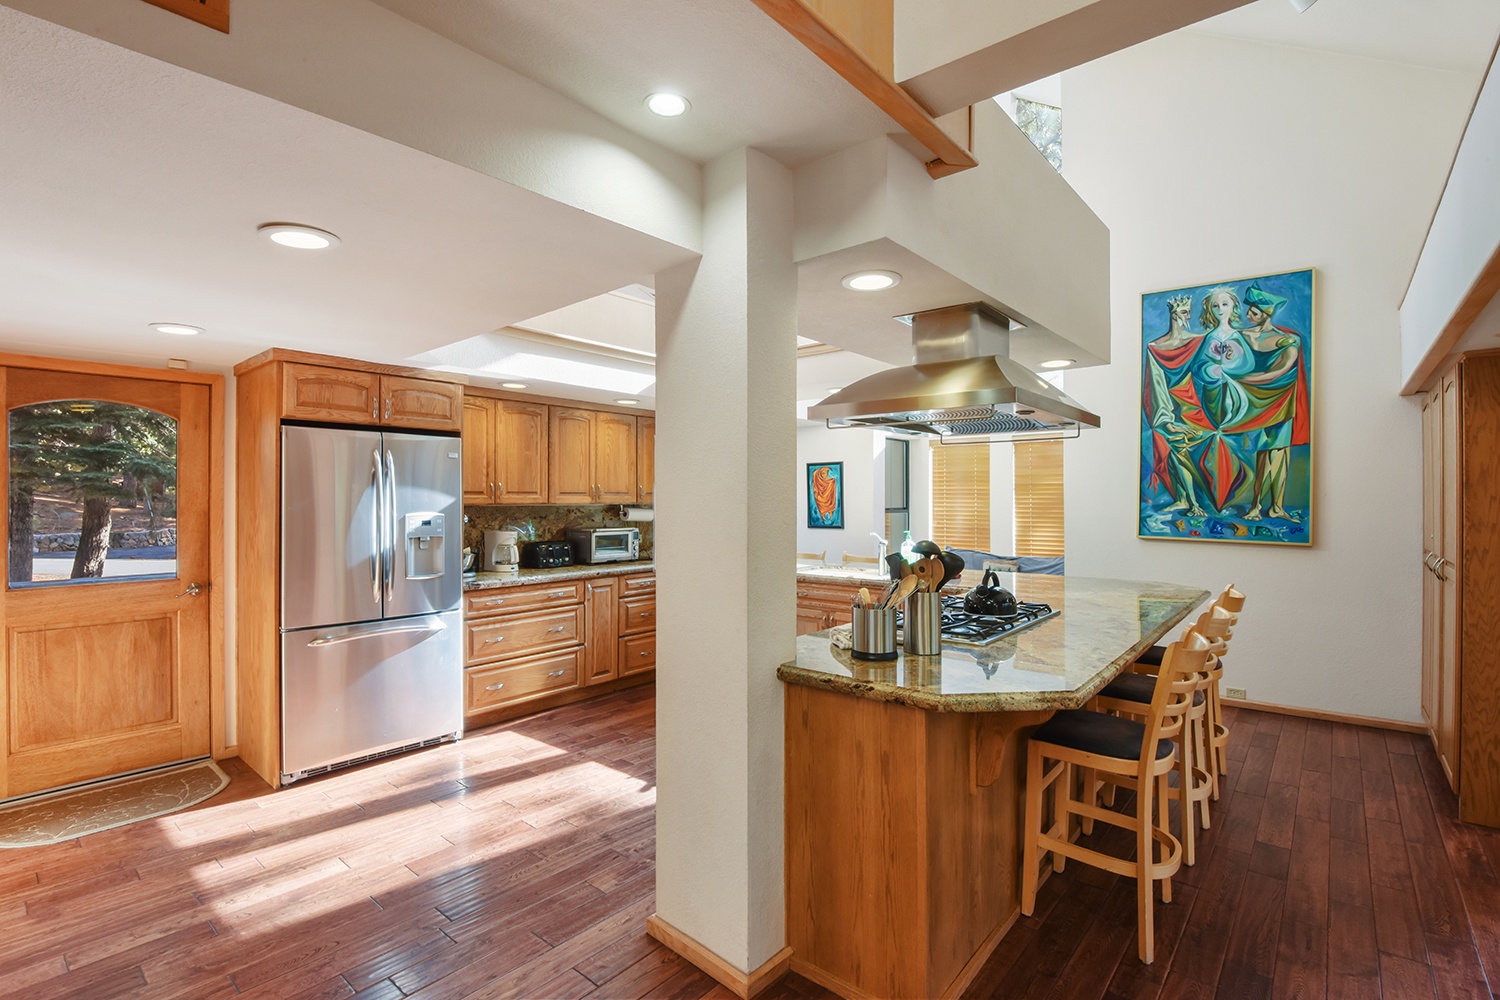 Full gourmet kitchen with stainless-steal appliances